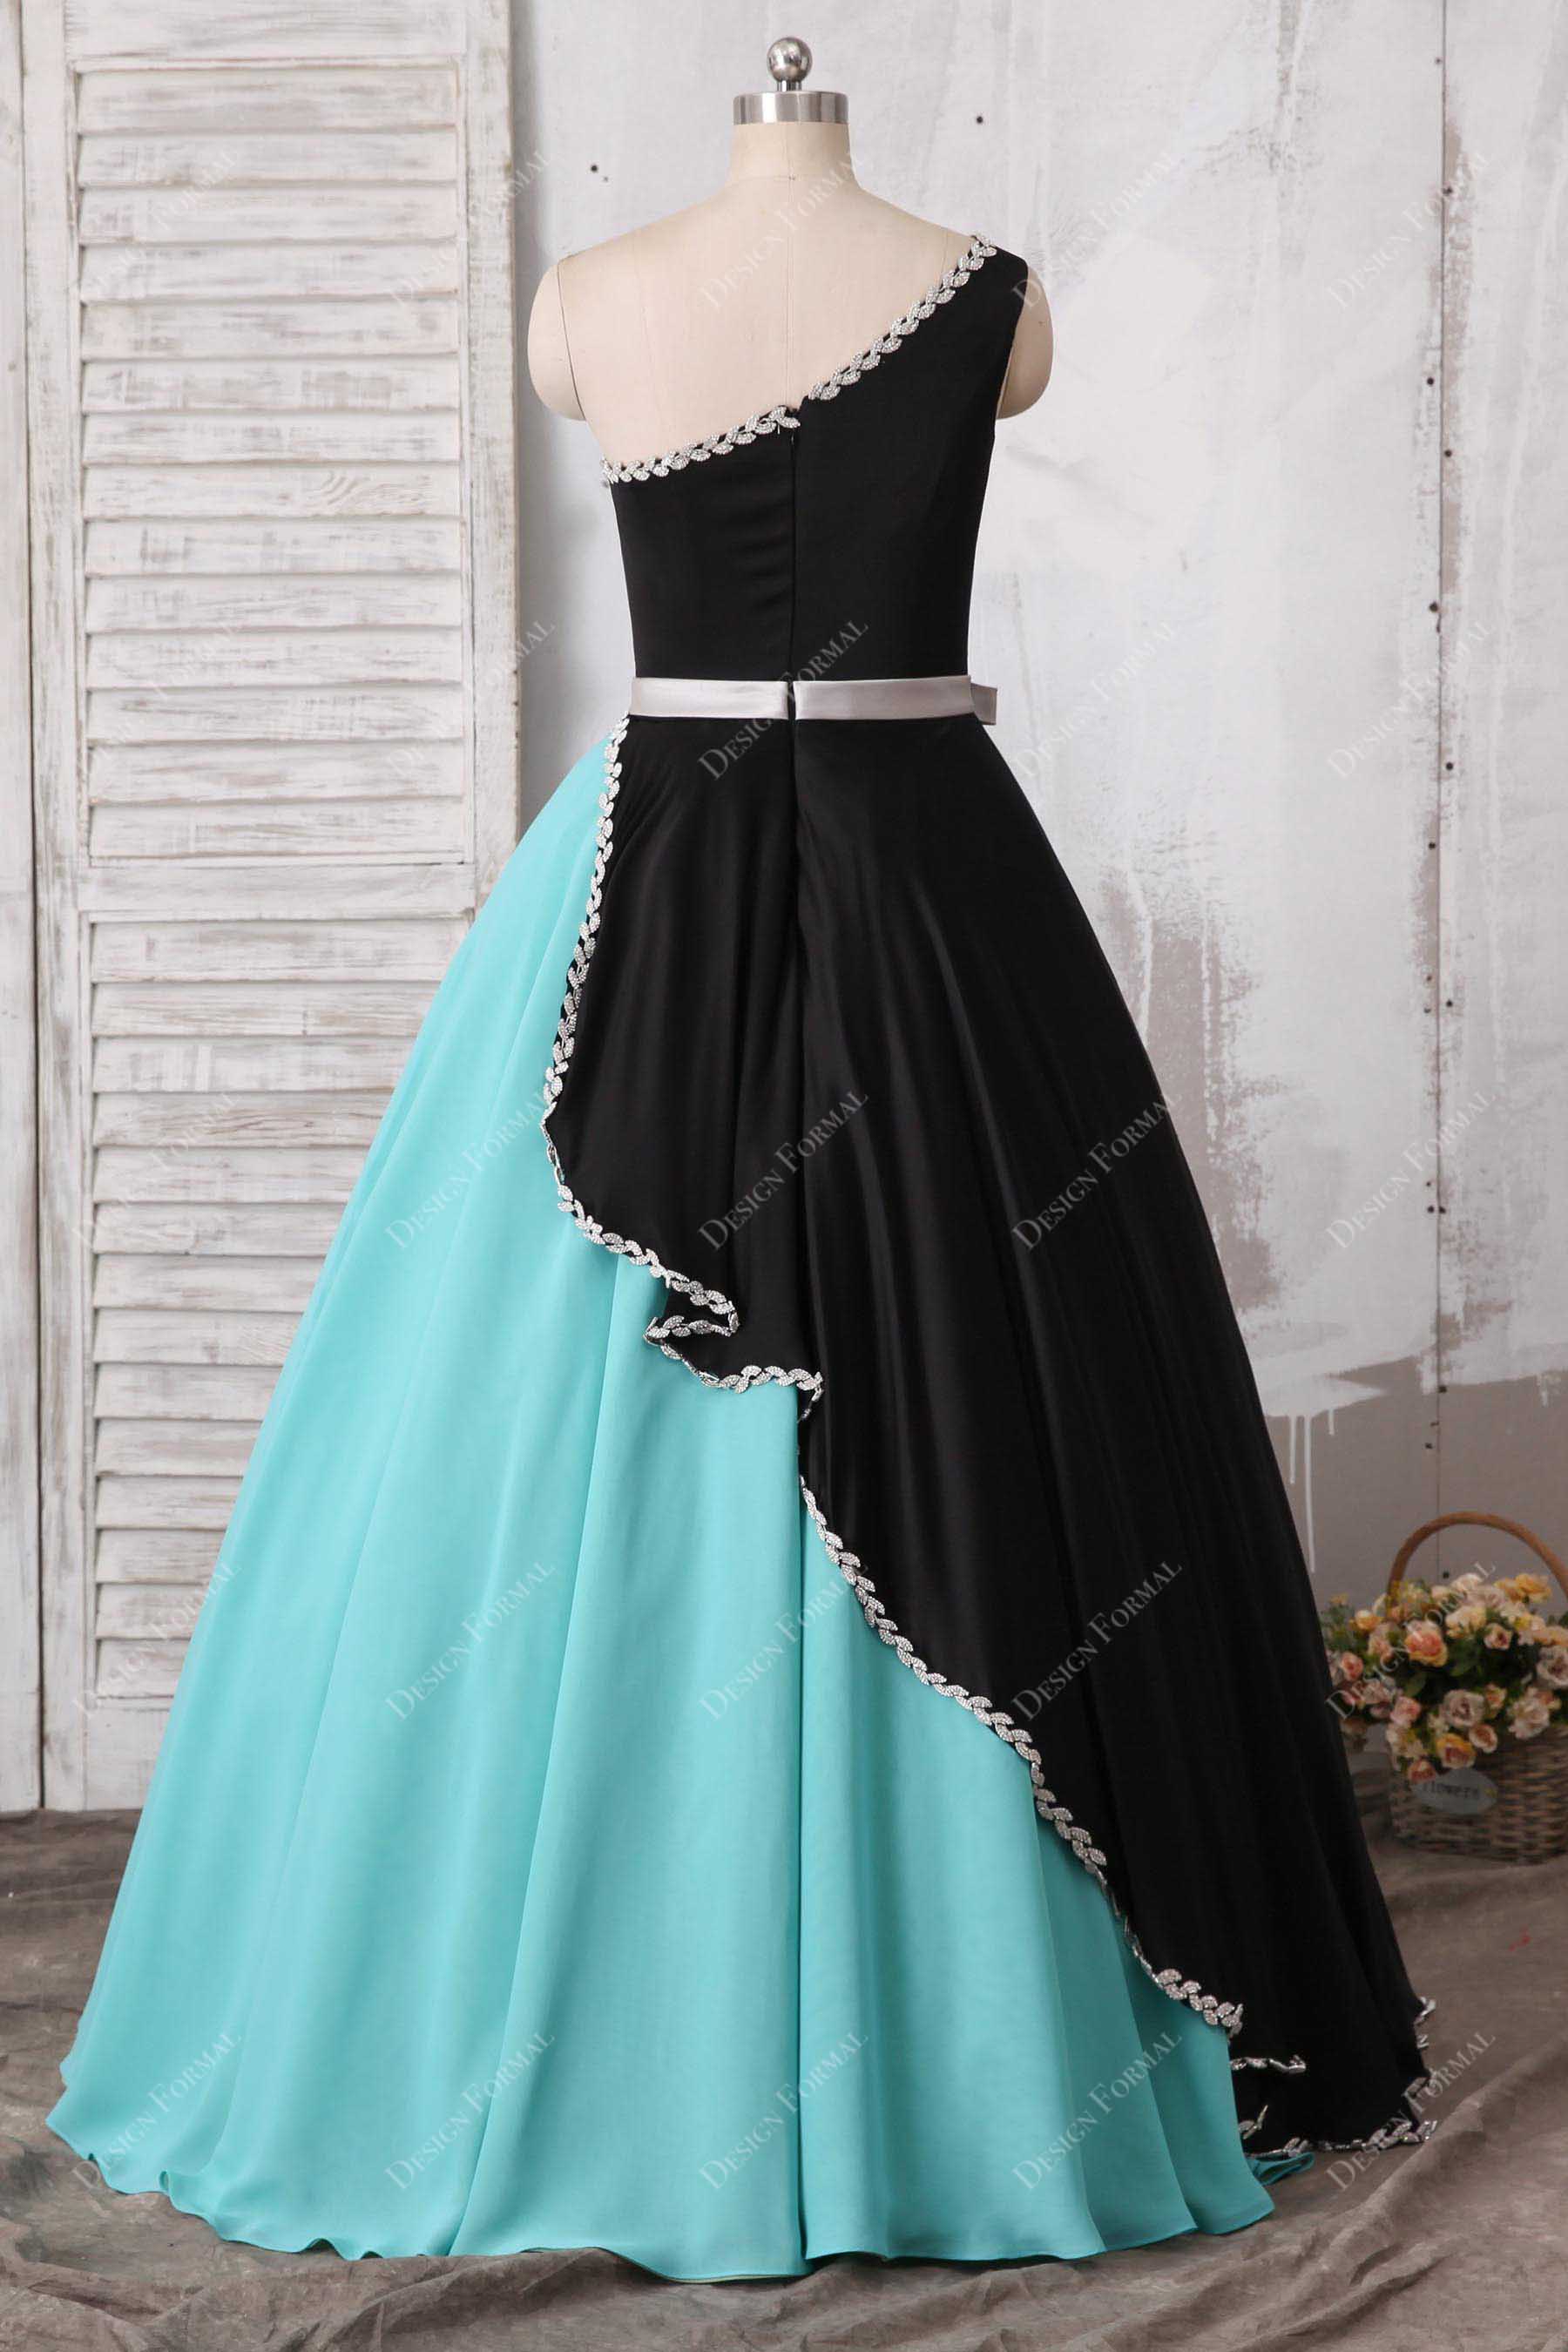 one-sleeve-ball-gown-satin-prom-dress